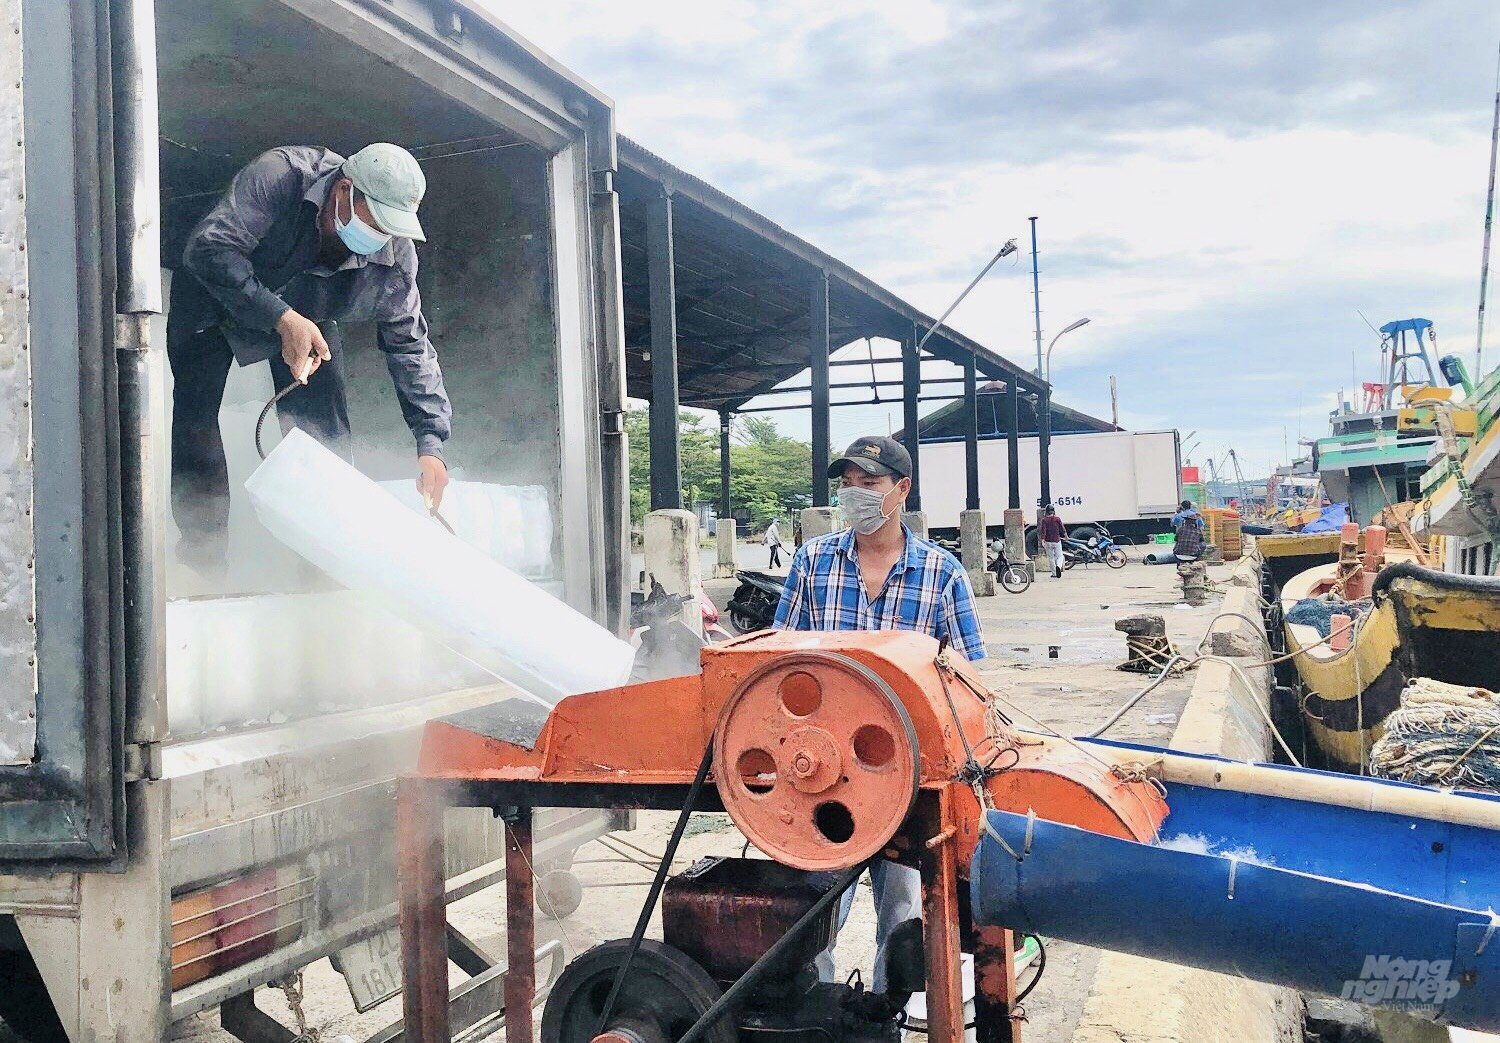 The pandemic prevention and control has been tightly implemented at fishing ports from the first days after social distancing in the province. Photo: Tran Trung.